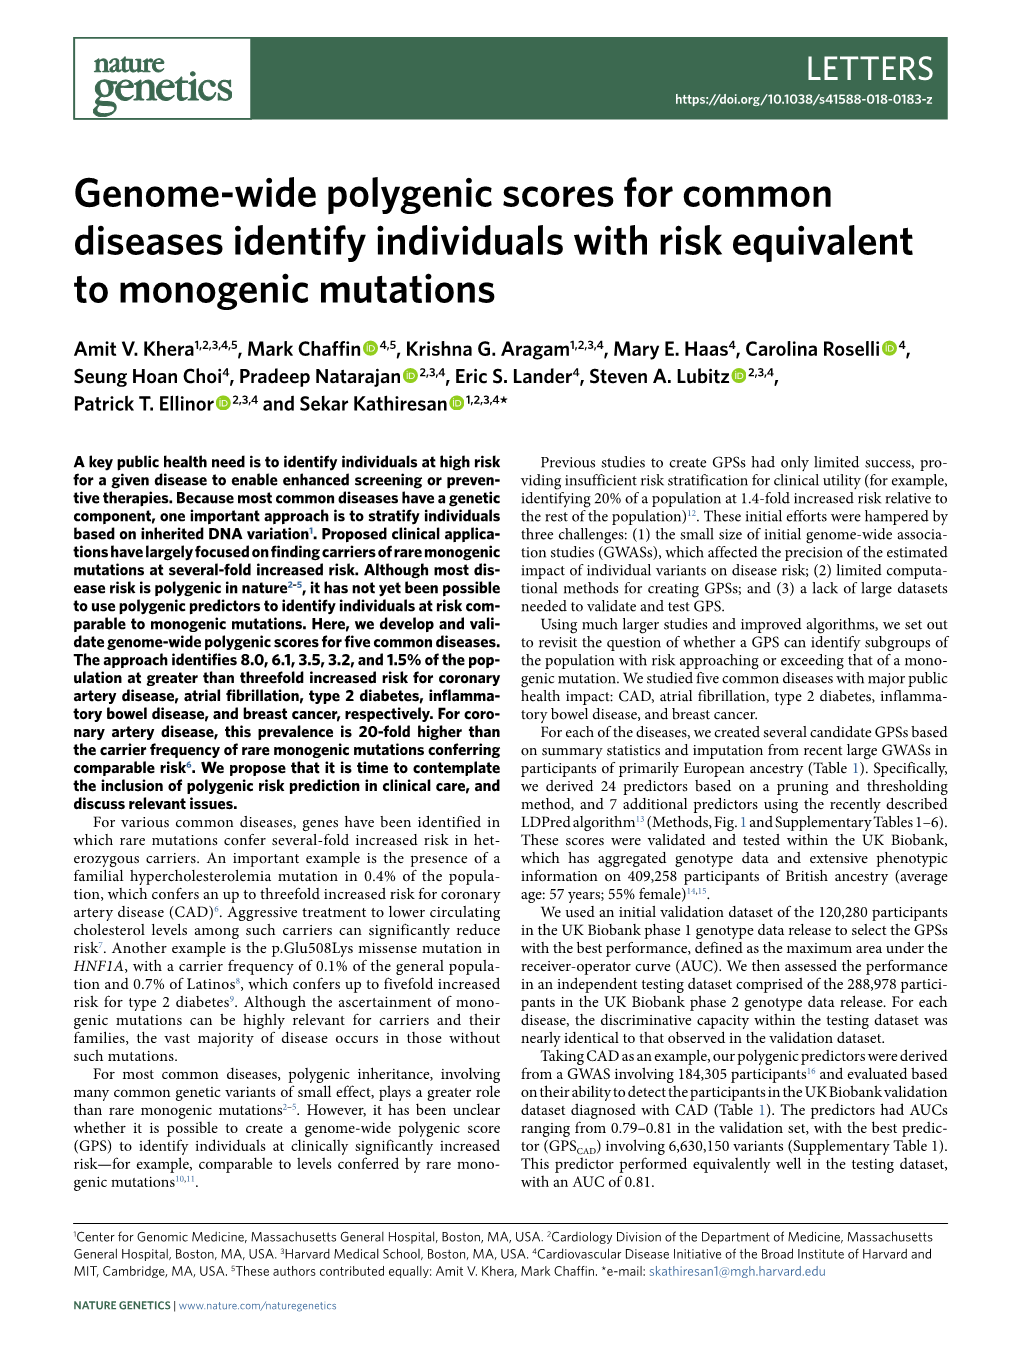 Genome-Wide Polygenic Scores for Common Diseases Identify Individuals with Risk Equivalent to Monogenic Mutations